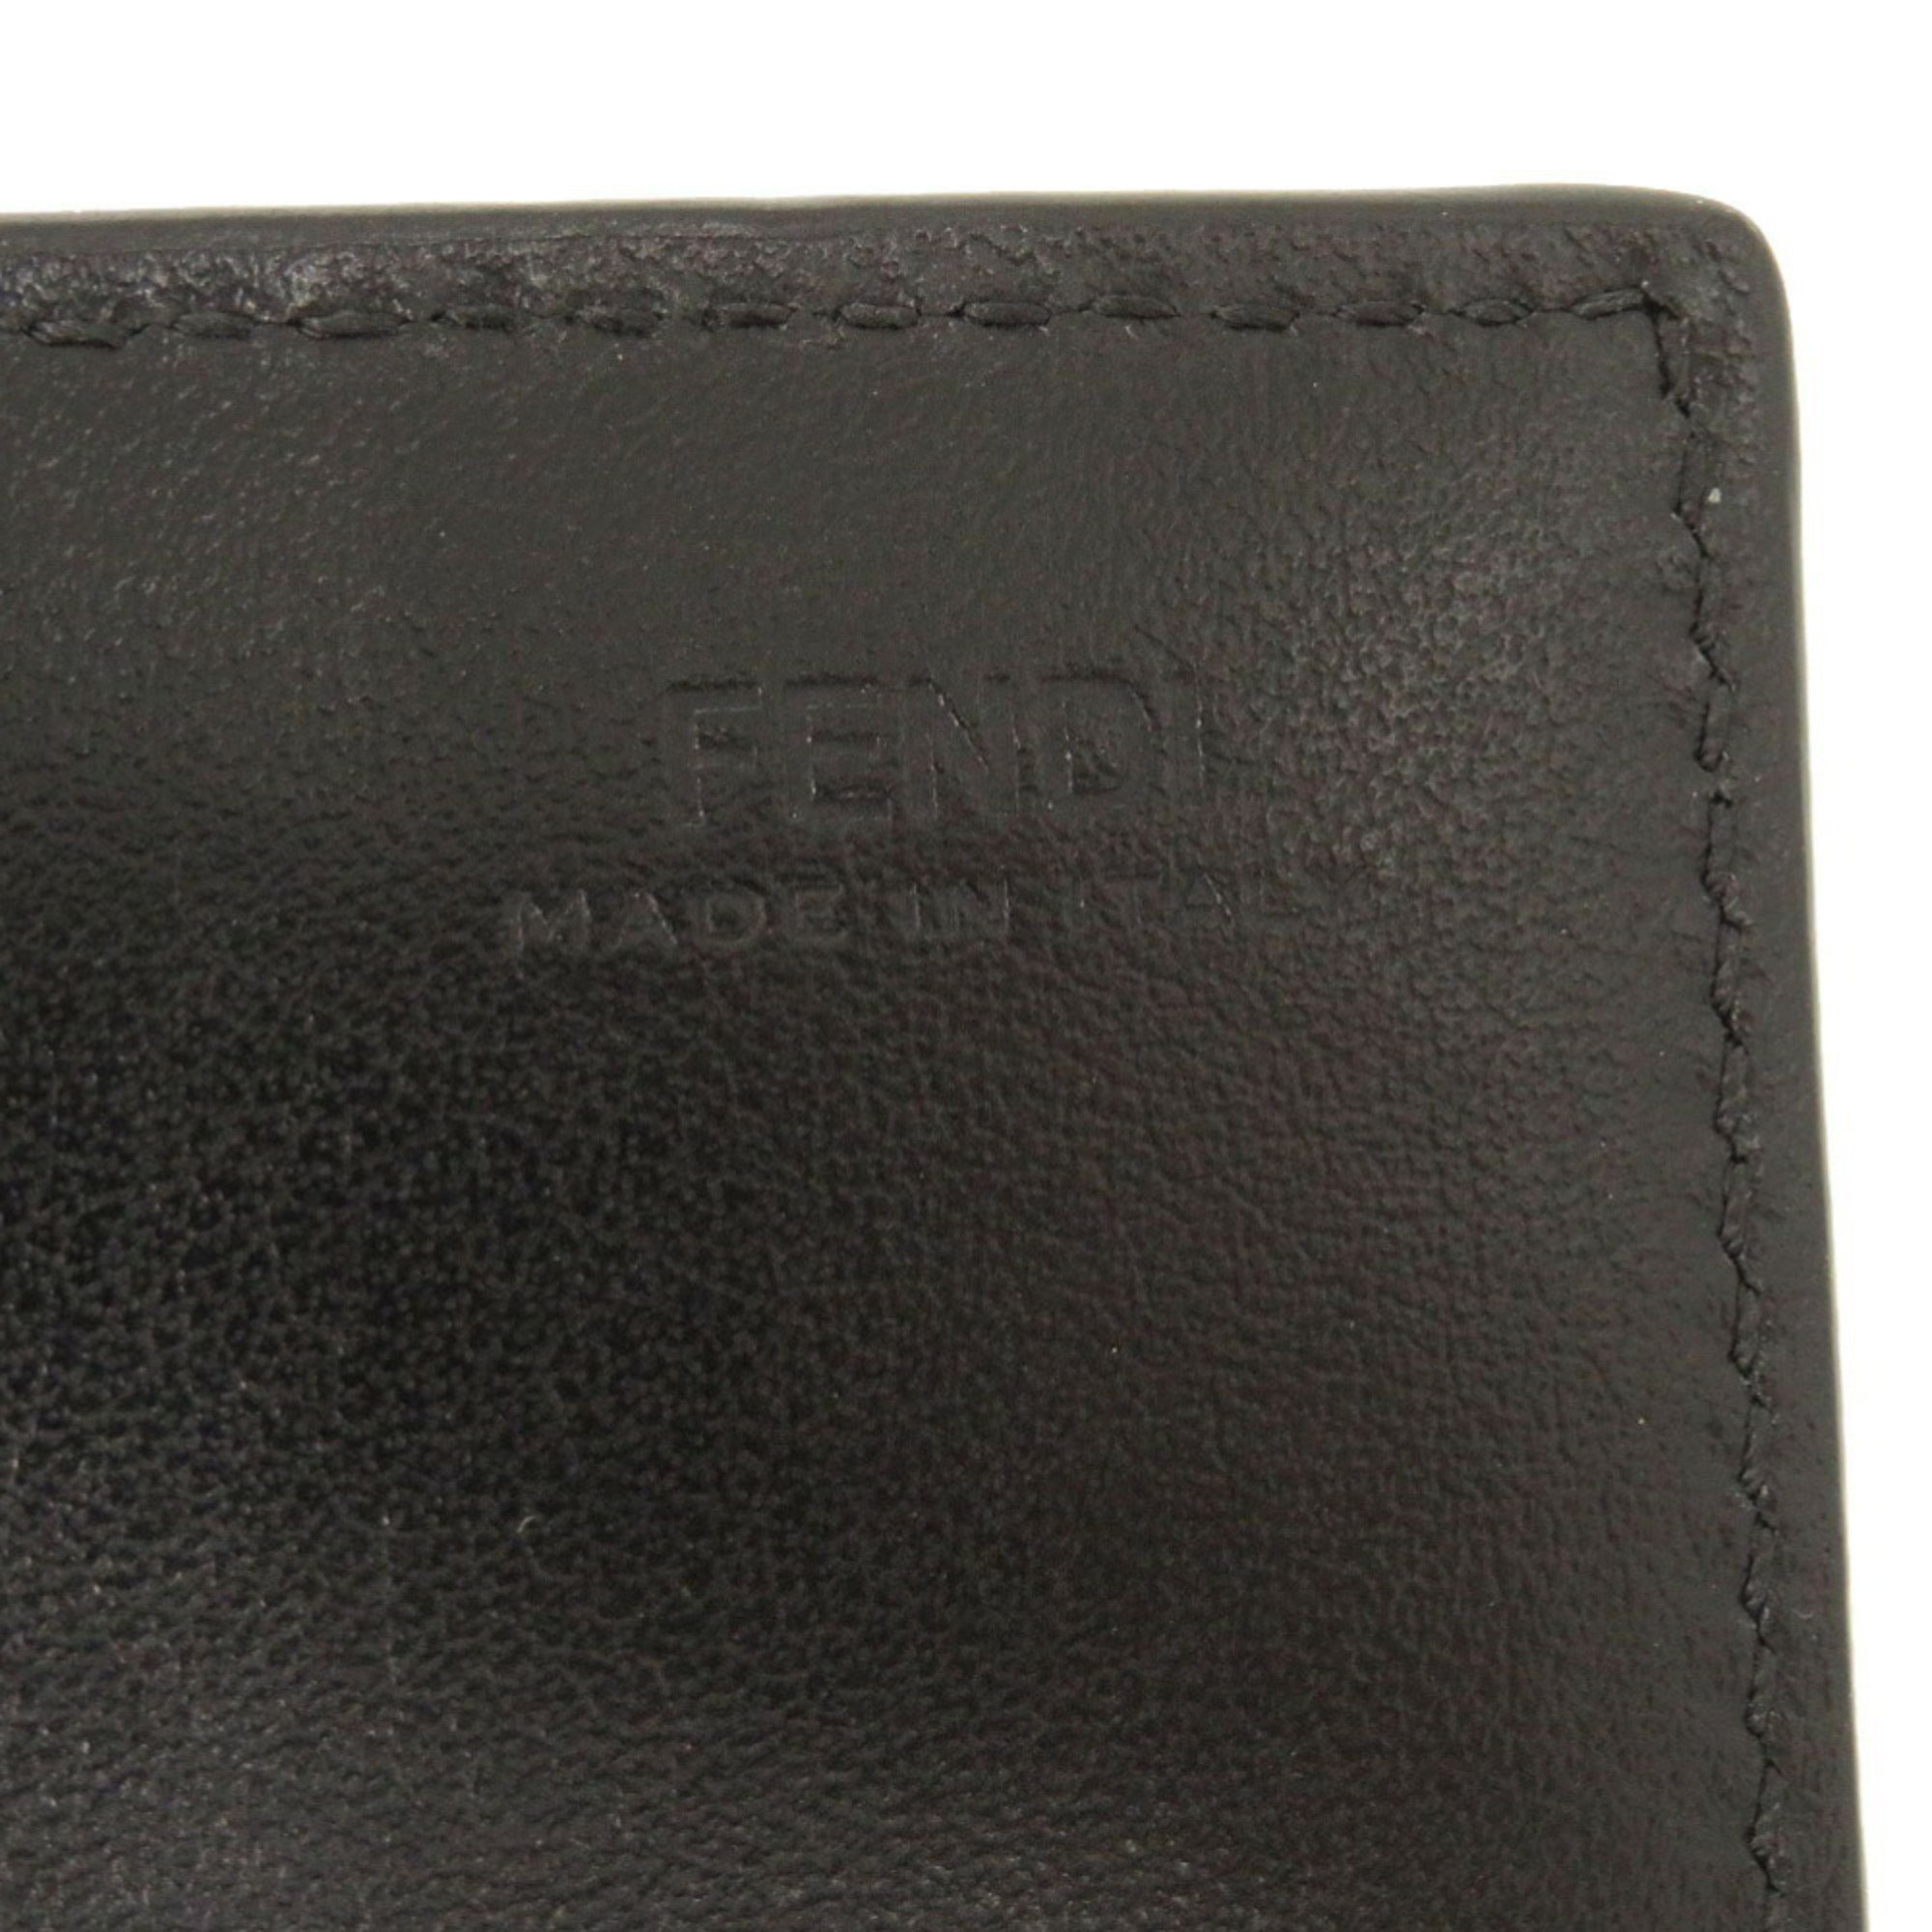 Fendi By The Way Continental 8M2051 Leather Black Long Wallet 2043 FENDI